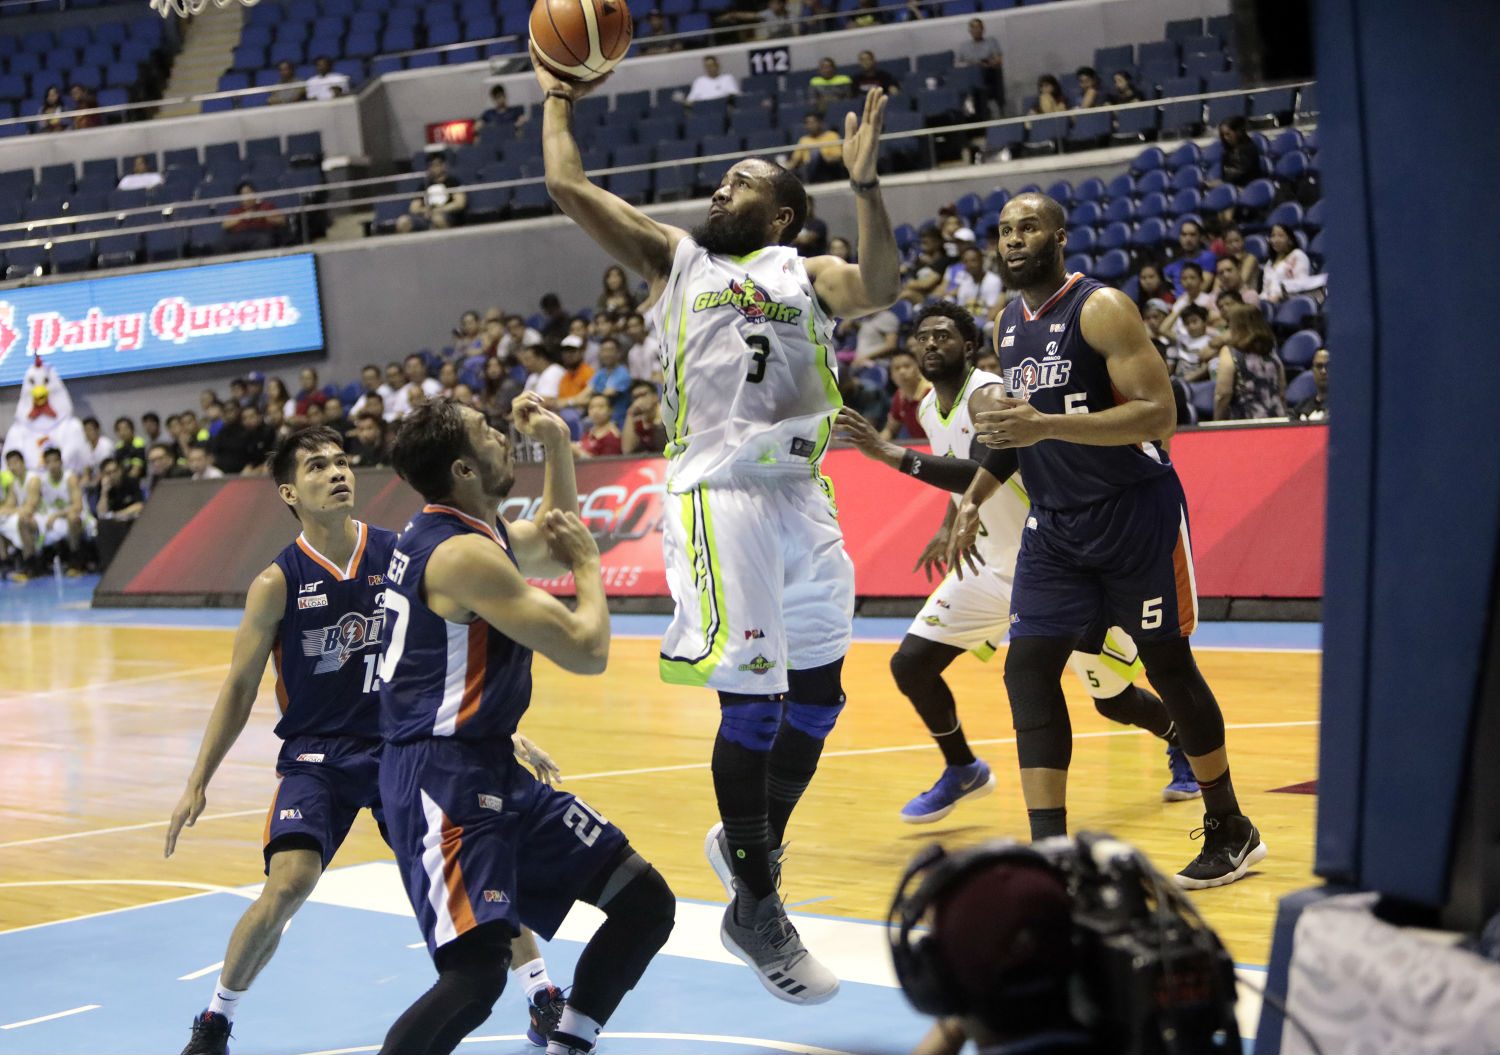 Pringle takes charge late as GlobalPort shuts down Meralco